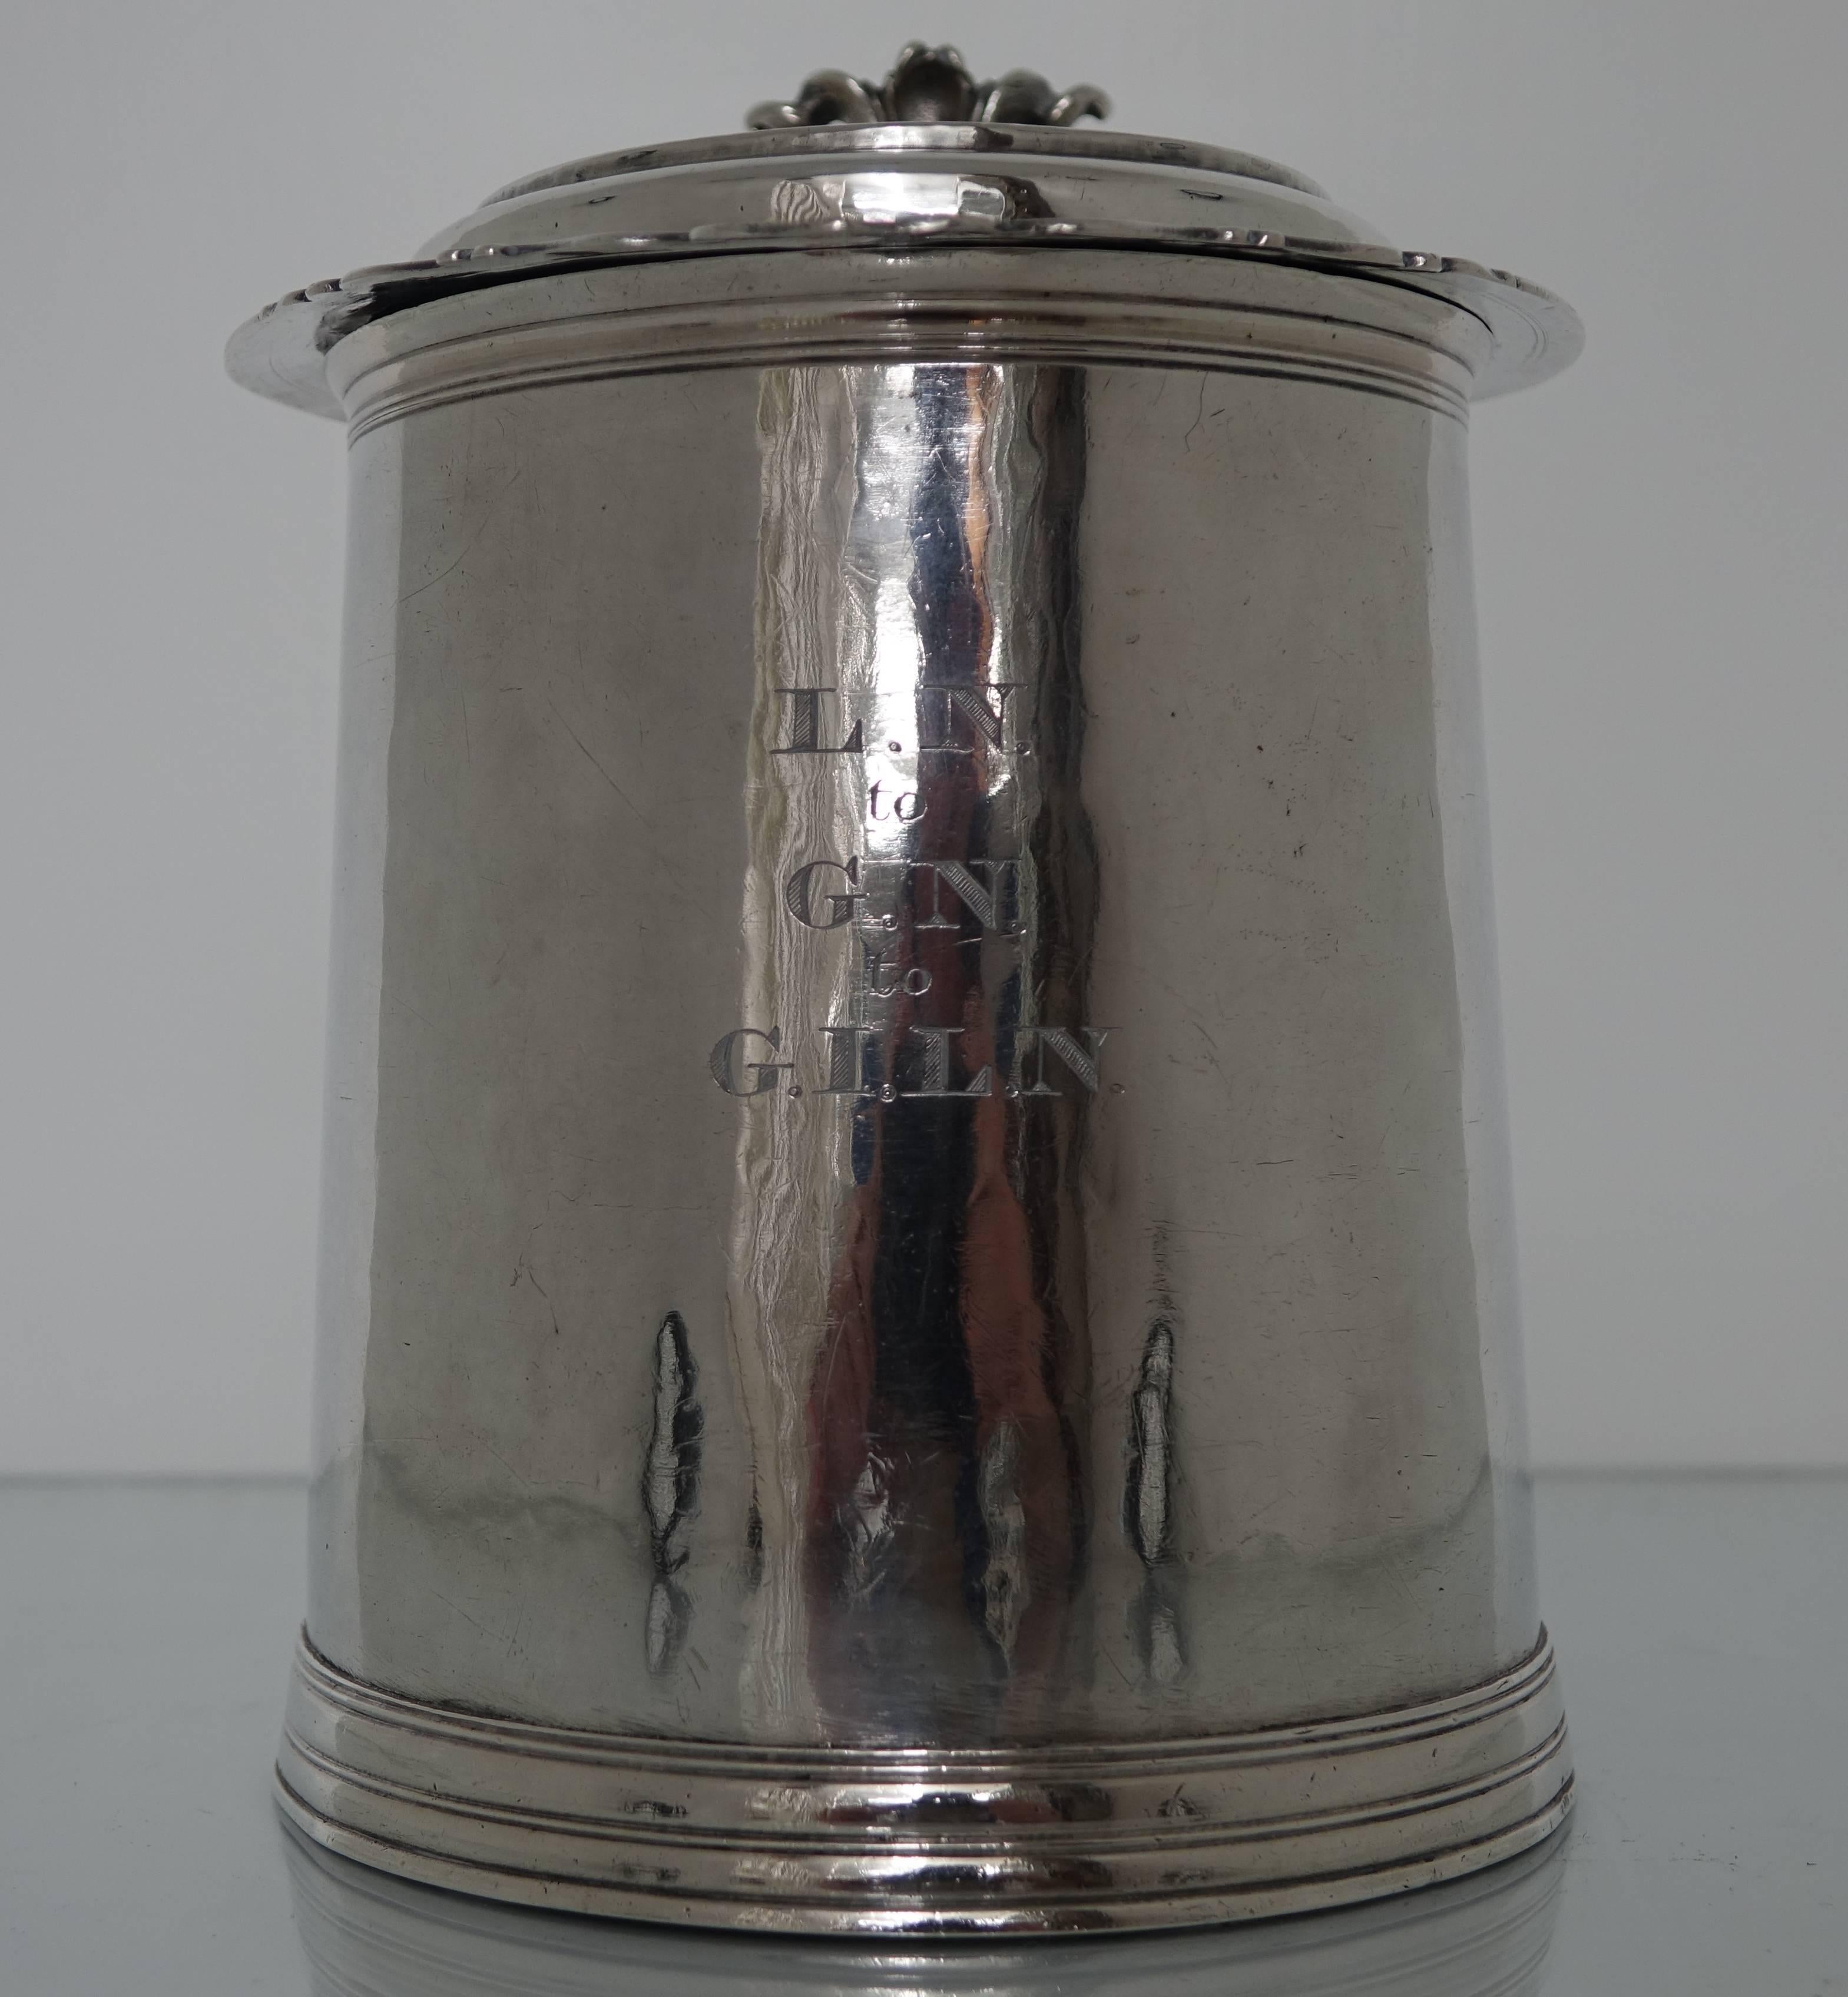 A very rare, large, William & Mary silver tankard with a hinged cover. Boasting a cylindrical, plain, hammered body, typical of the period, with extremely rare teardrop beading on the lid and handle. The tankard has an excellent patina and a